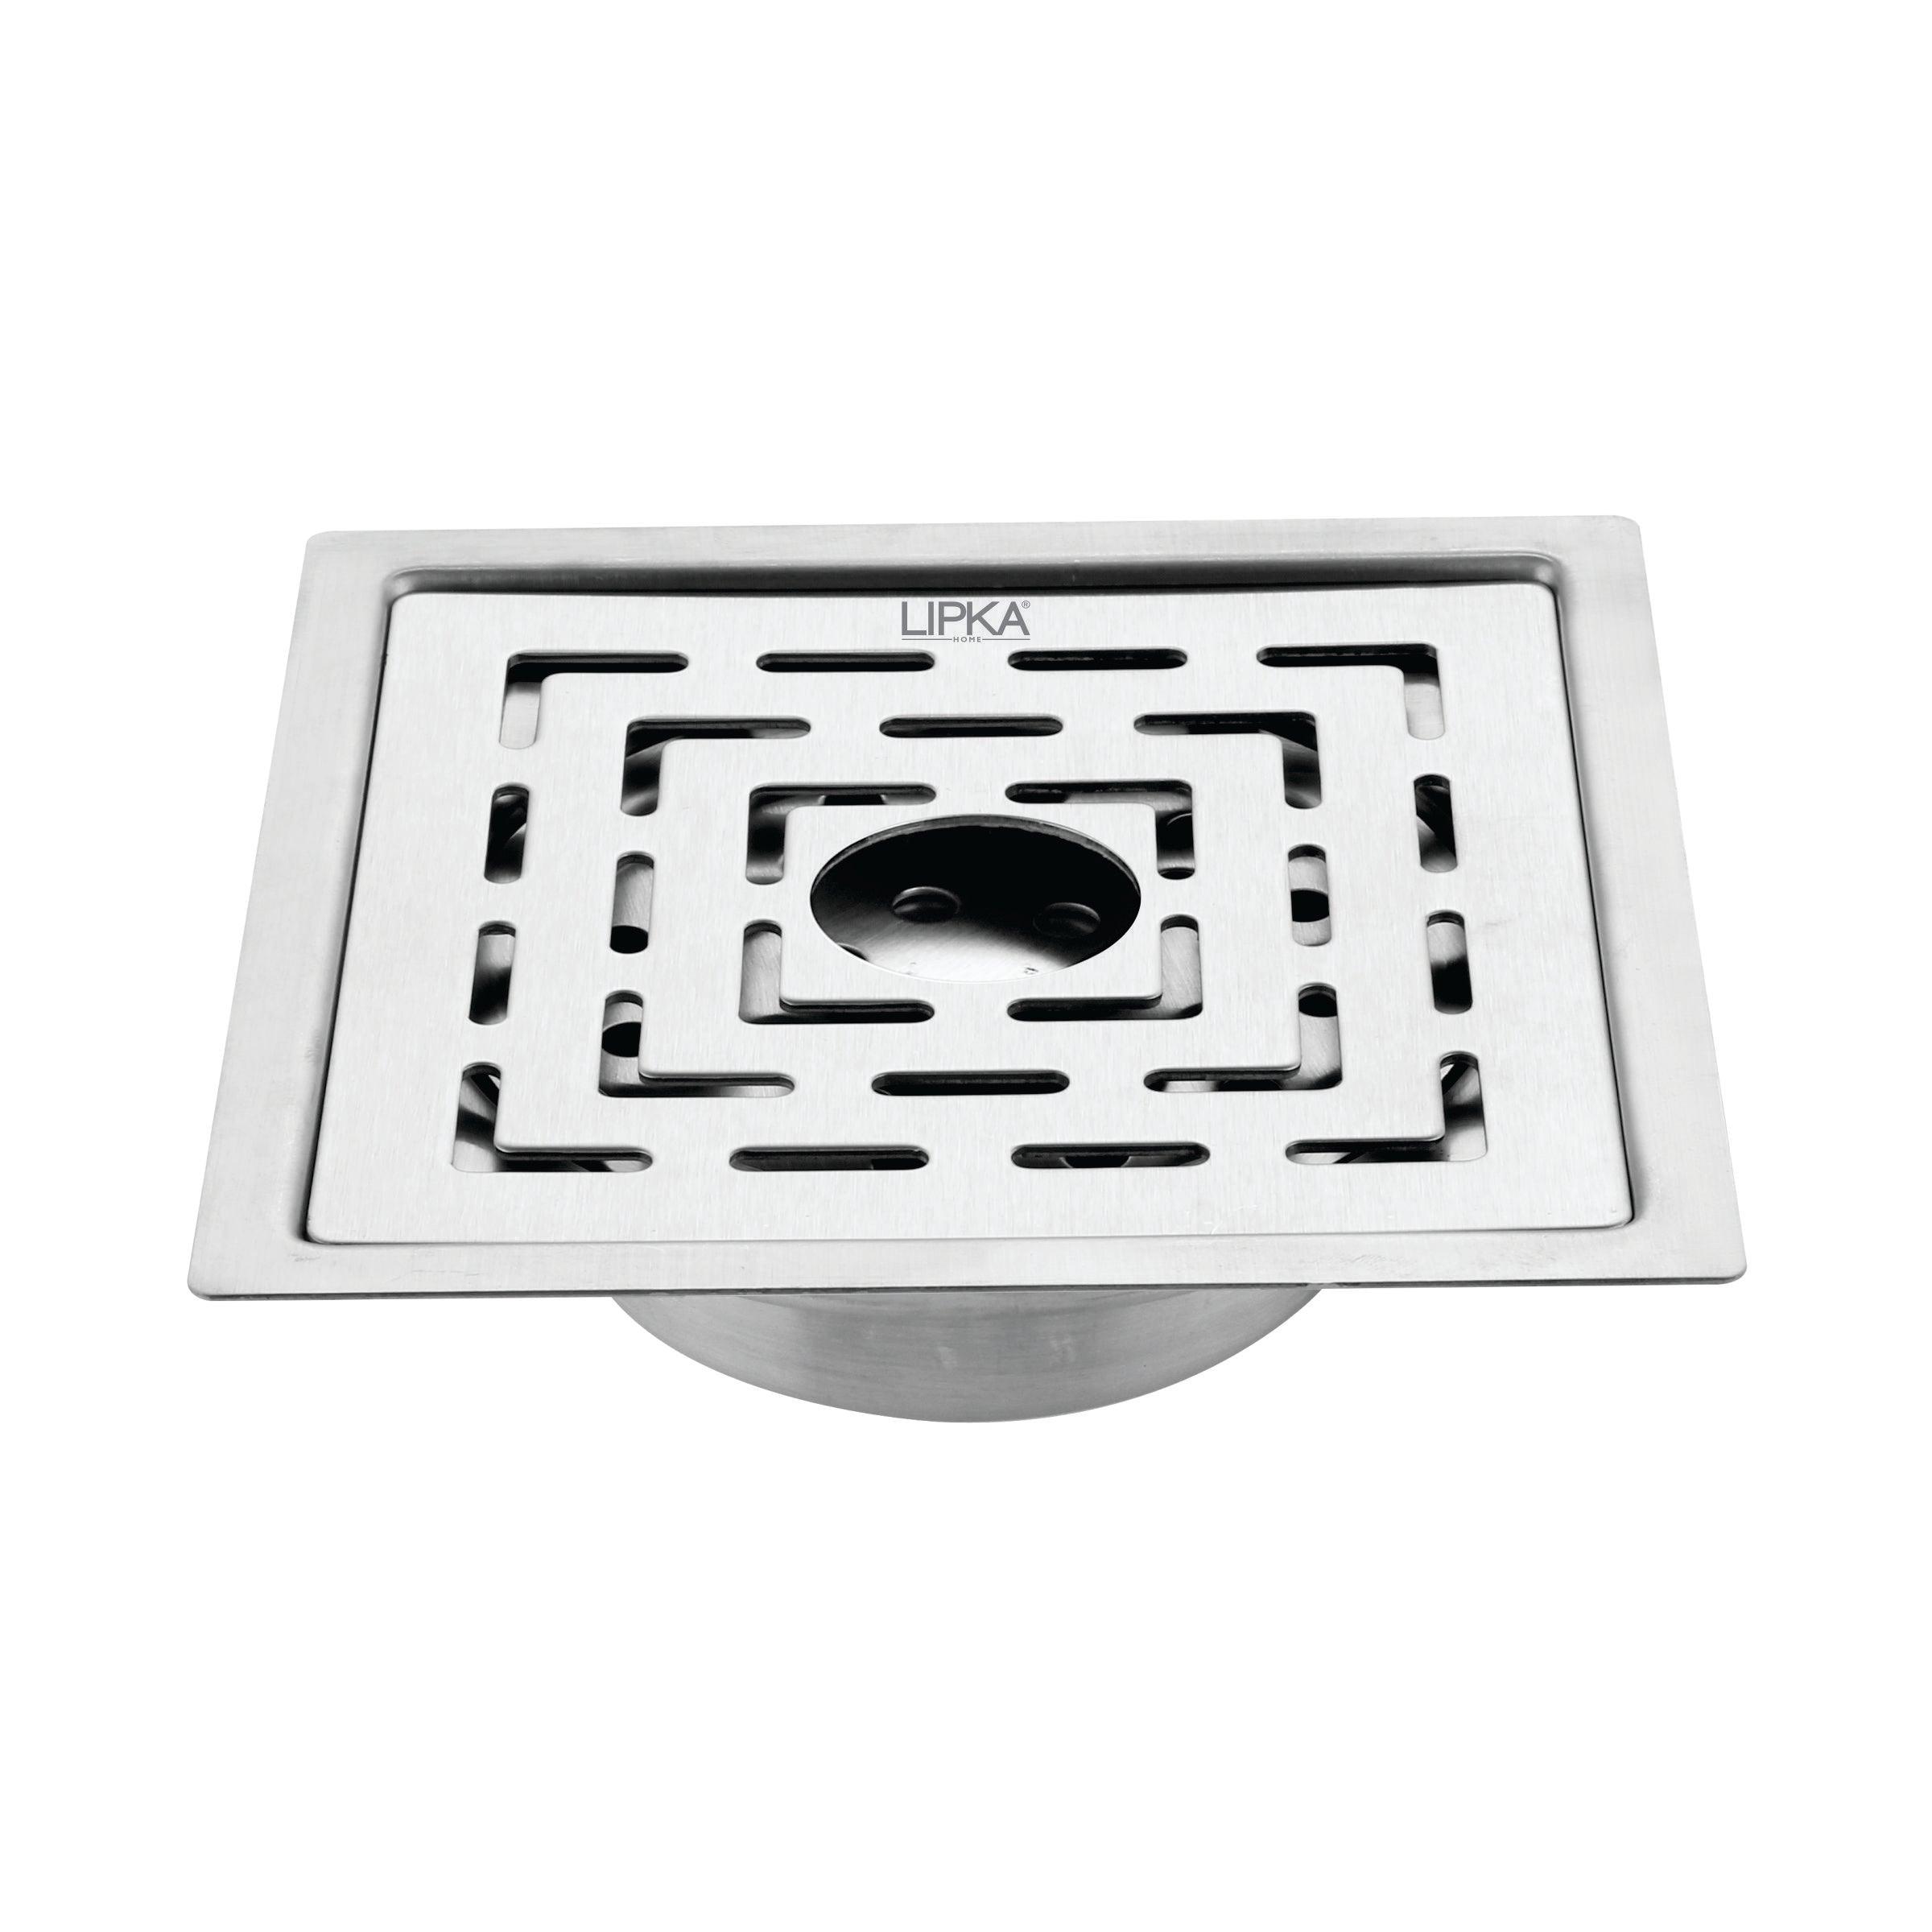 Orange Exclusive Square Flat Cut Floor Drain (6 x 6 Inches) with Hole and Cockroach Trap